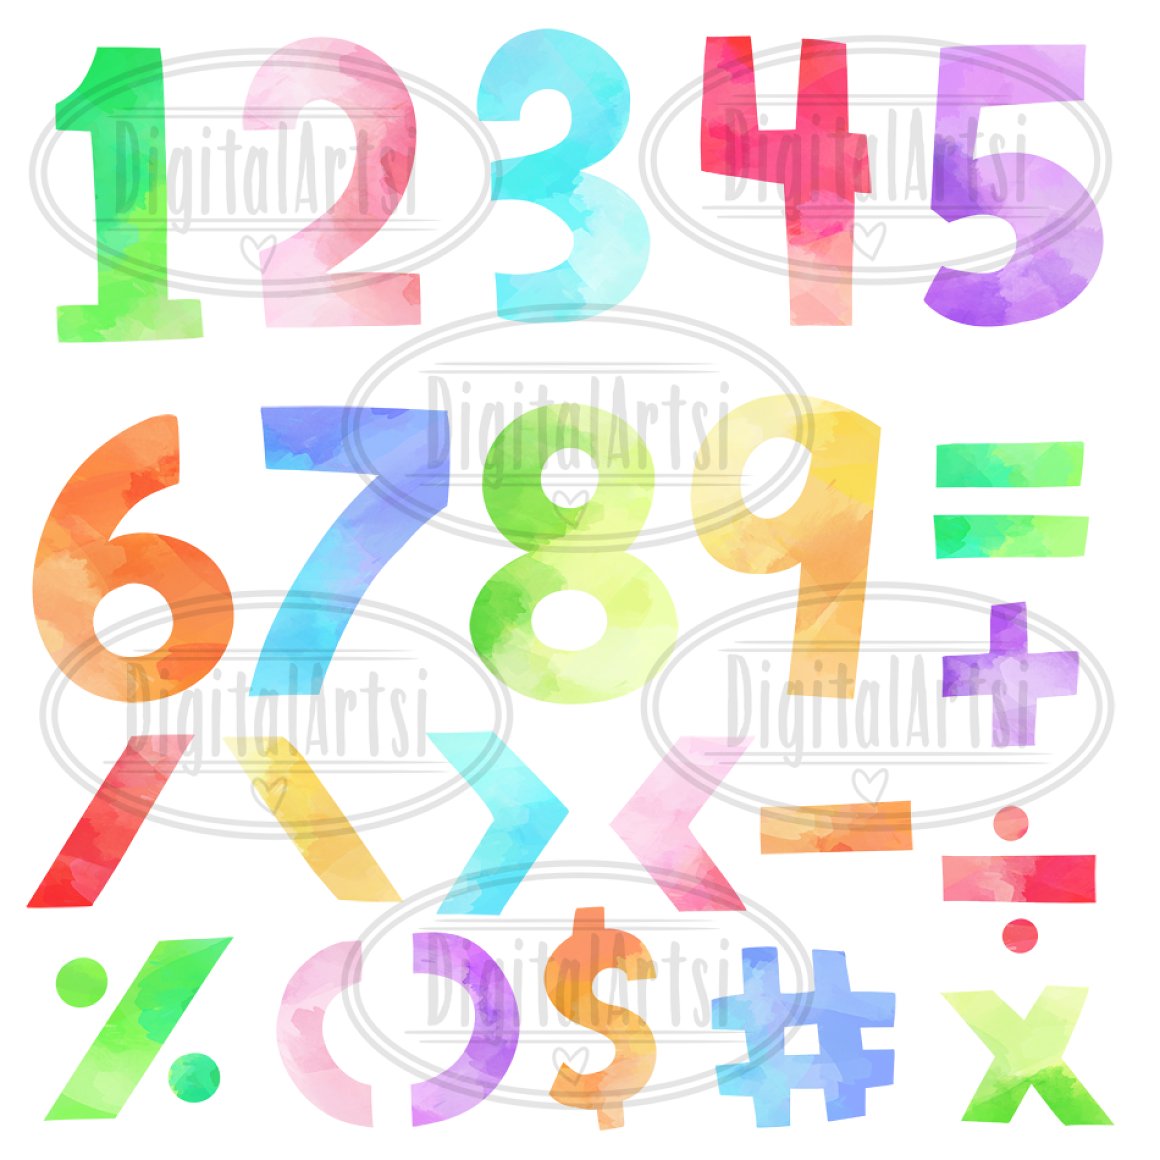 Numbers and symbols are colored.